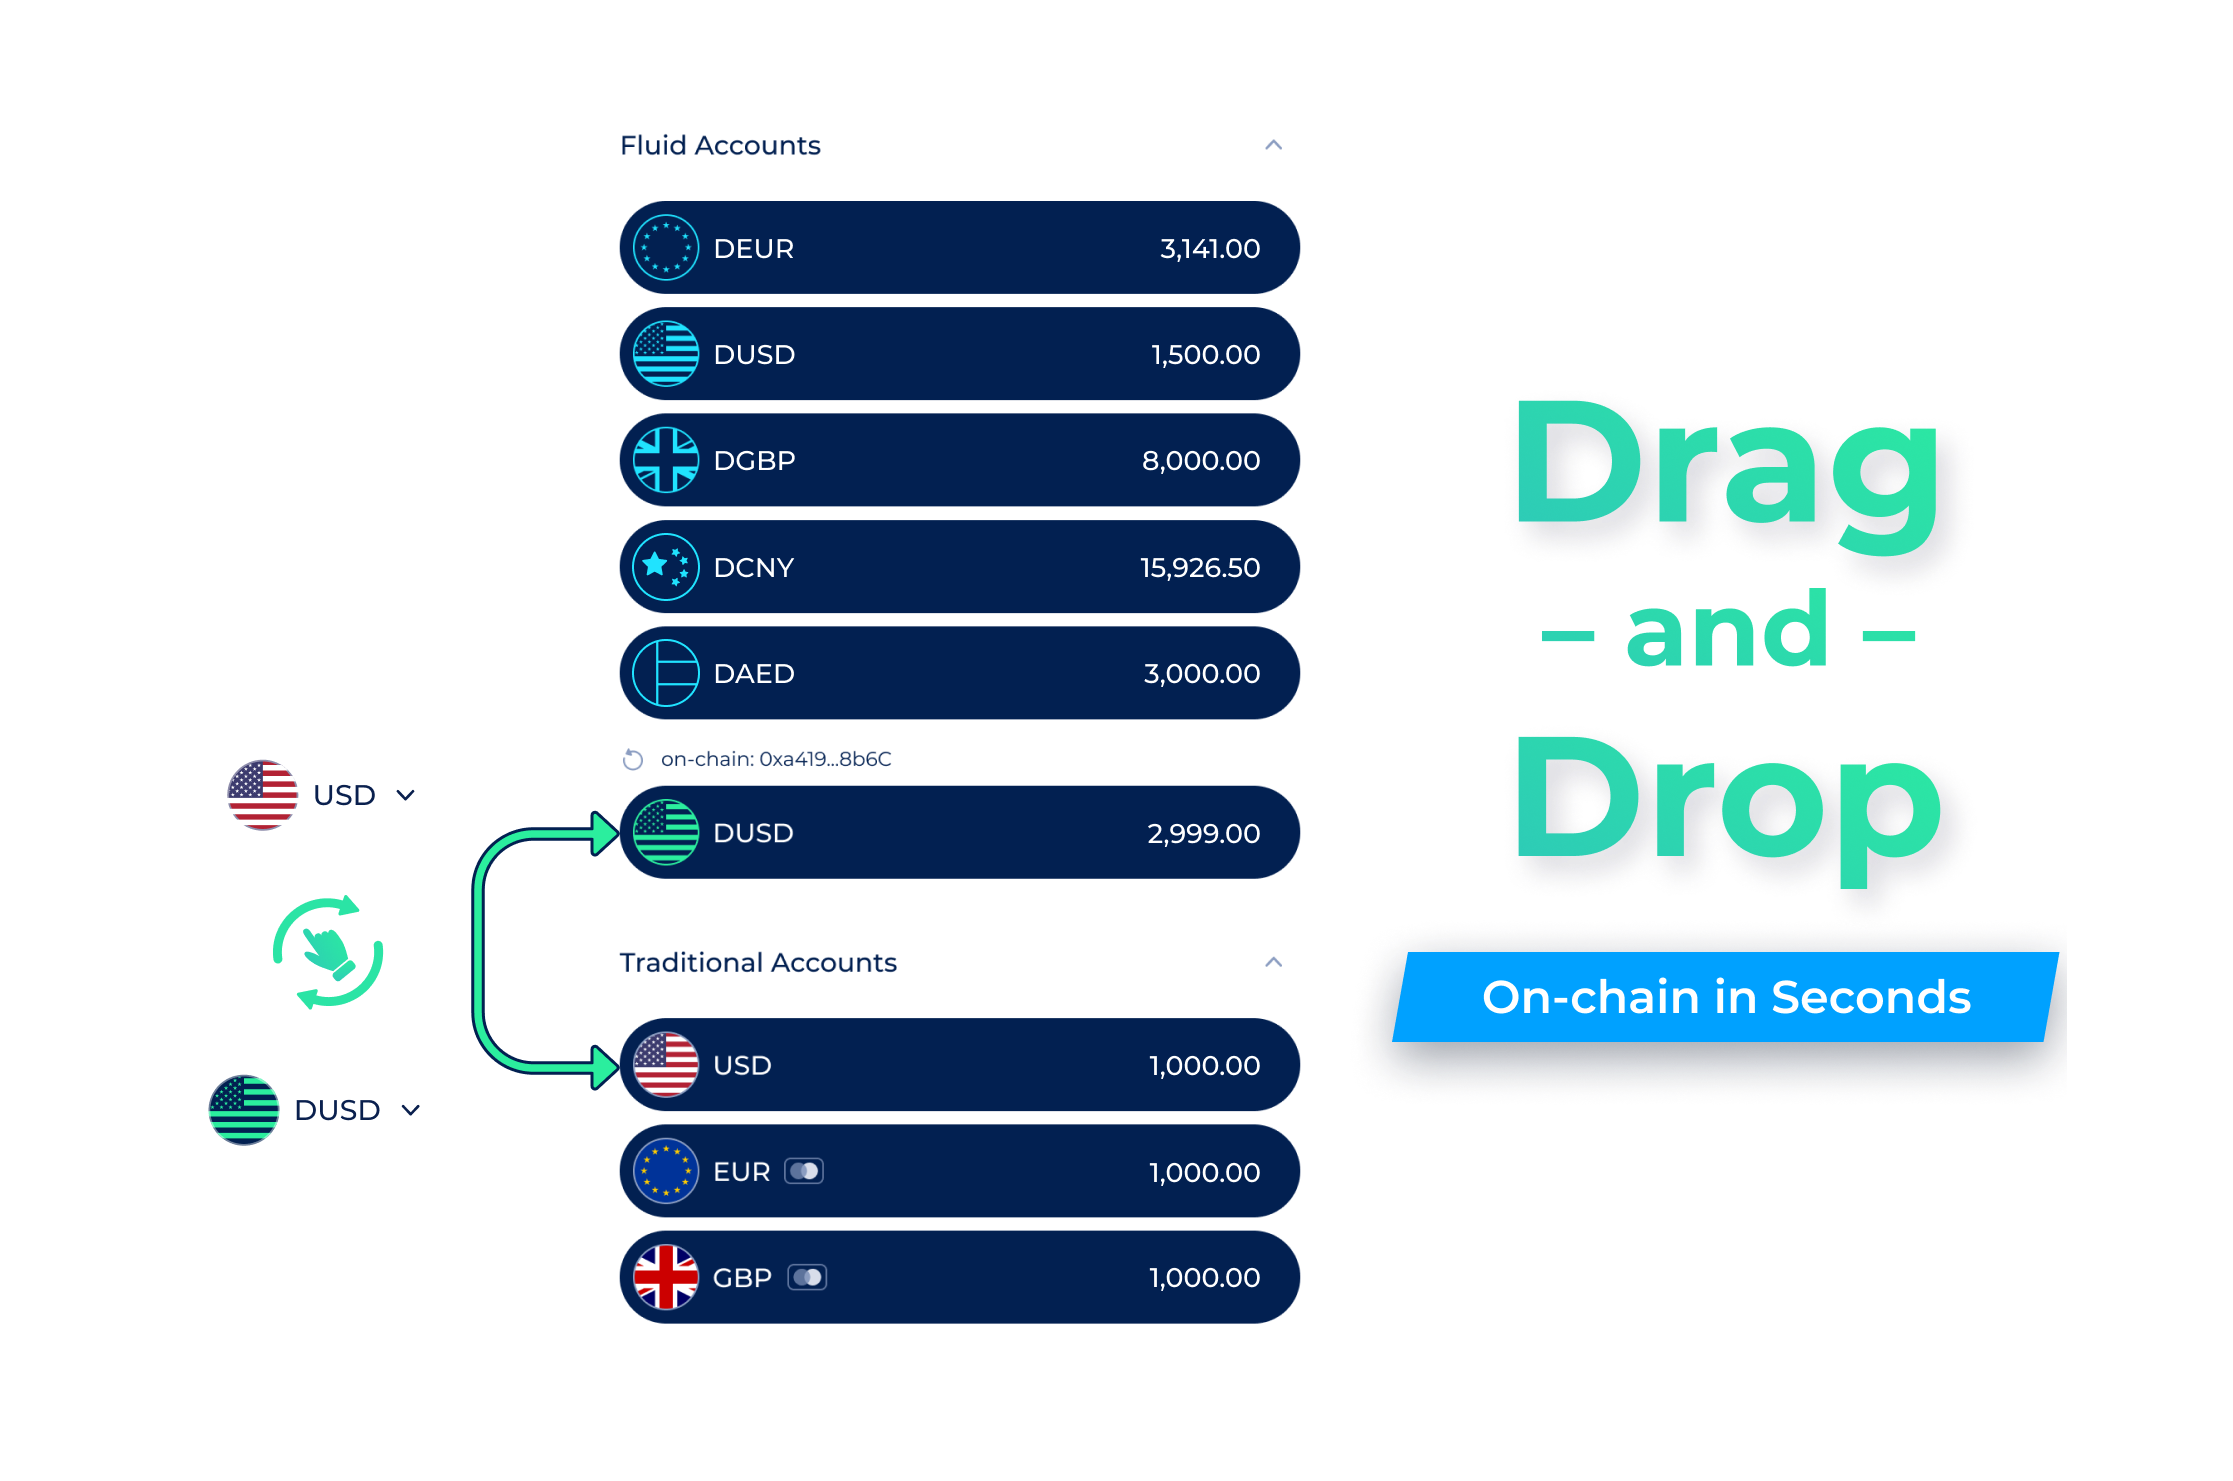 Drag and Drop, From your Bank Account, On-chain in Seconds